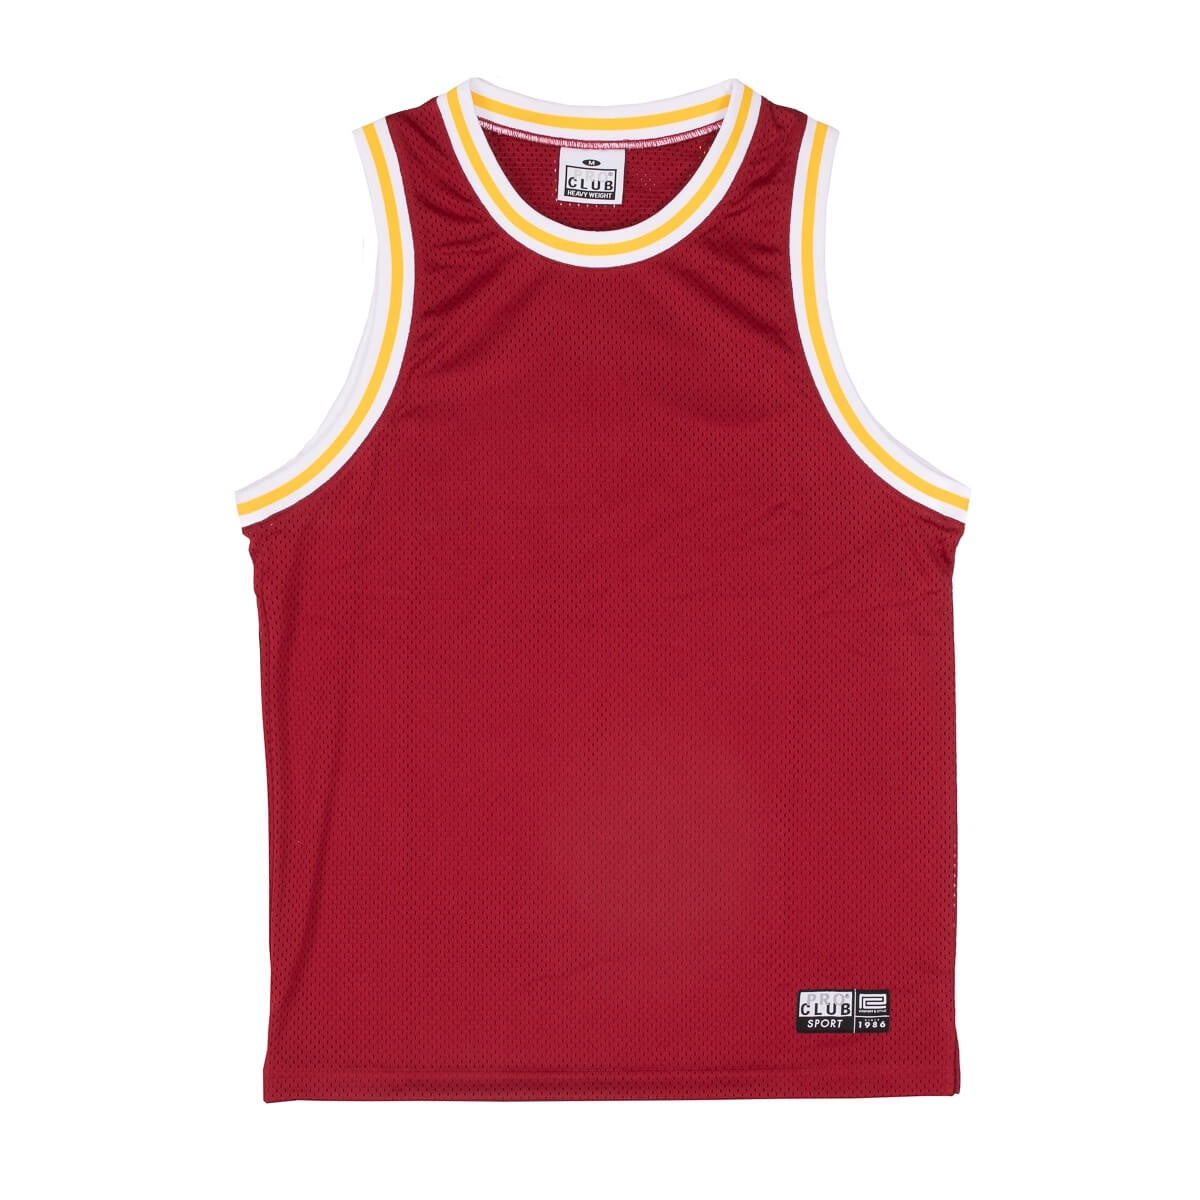 Pro Club - Classic Basketball Jersey - Red/White